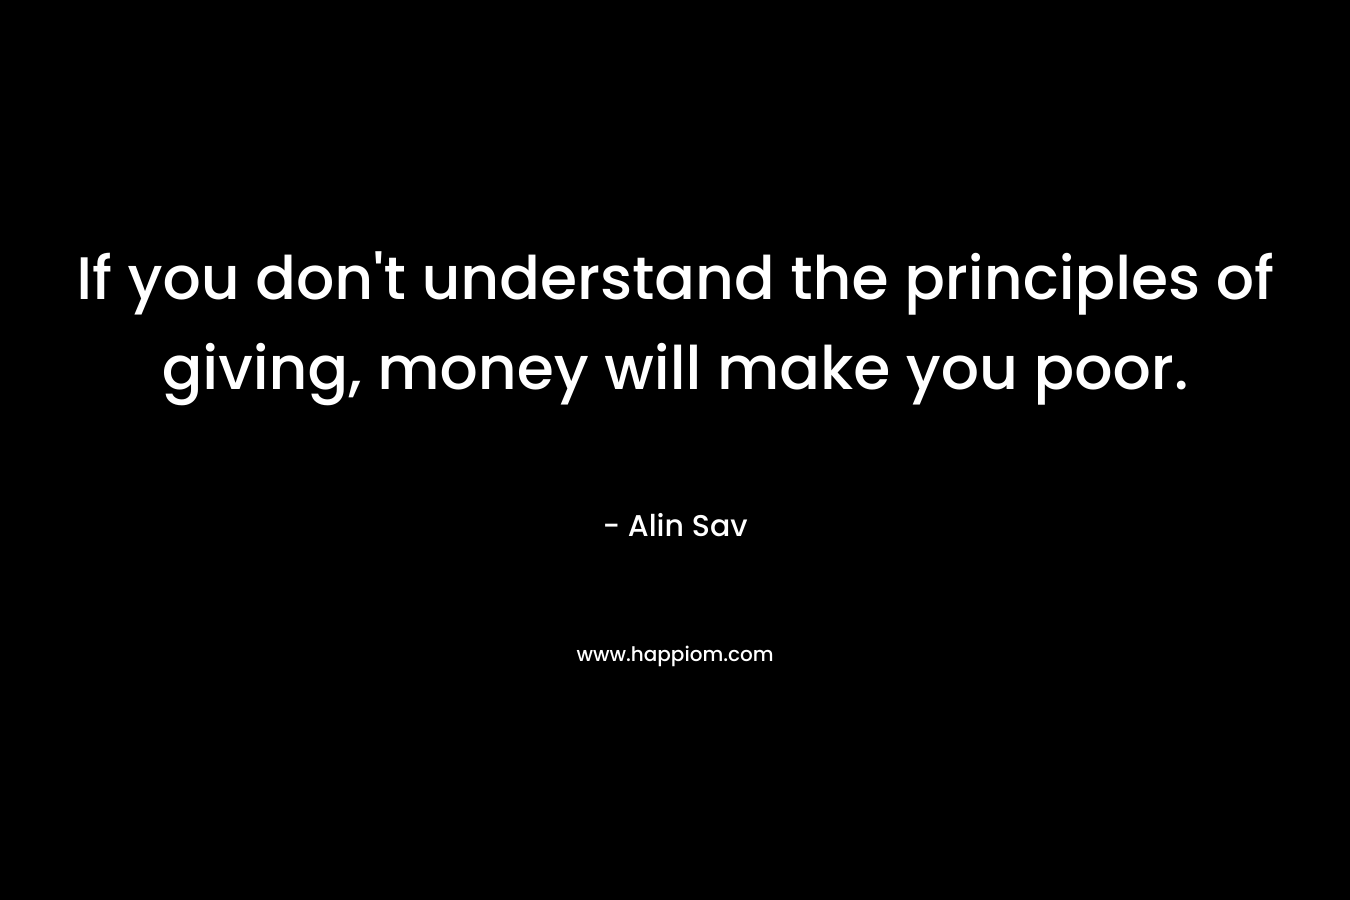 If you don't understand the principles of giving, money will make you poor.